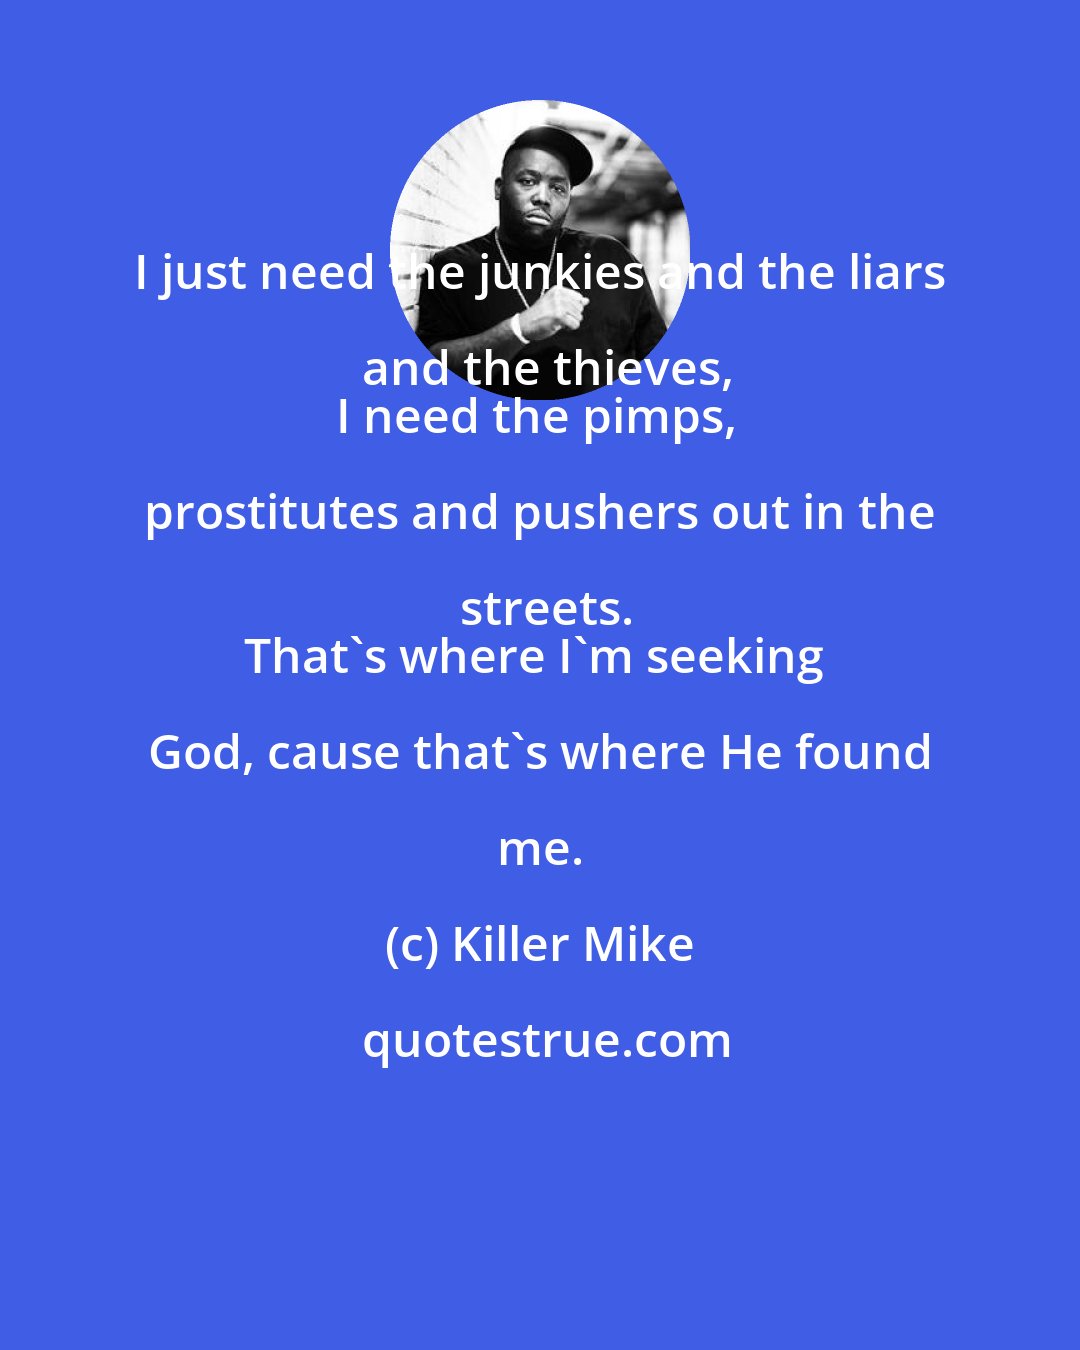 Killer Mike: I just need the junkies and the liars and the thieves,
I need the pimps, prostitutes and pushers out in the streets.
That's where I'm seeking God, cause that's where He found me.